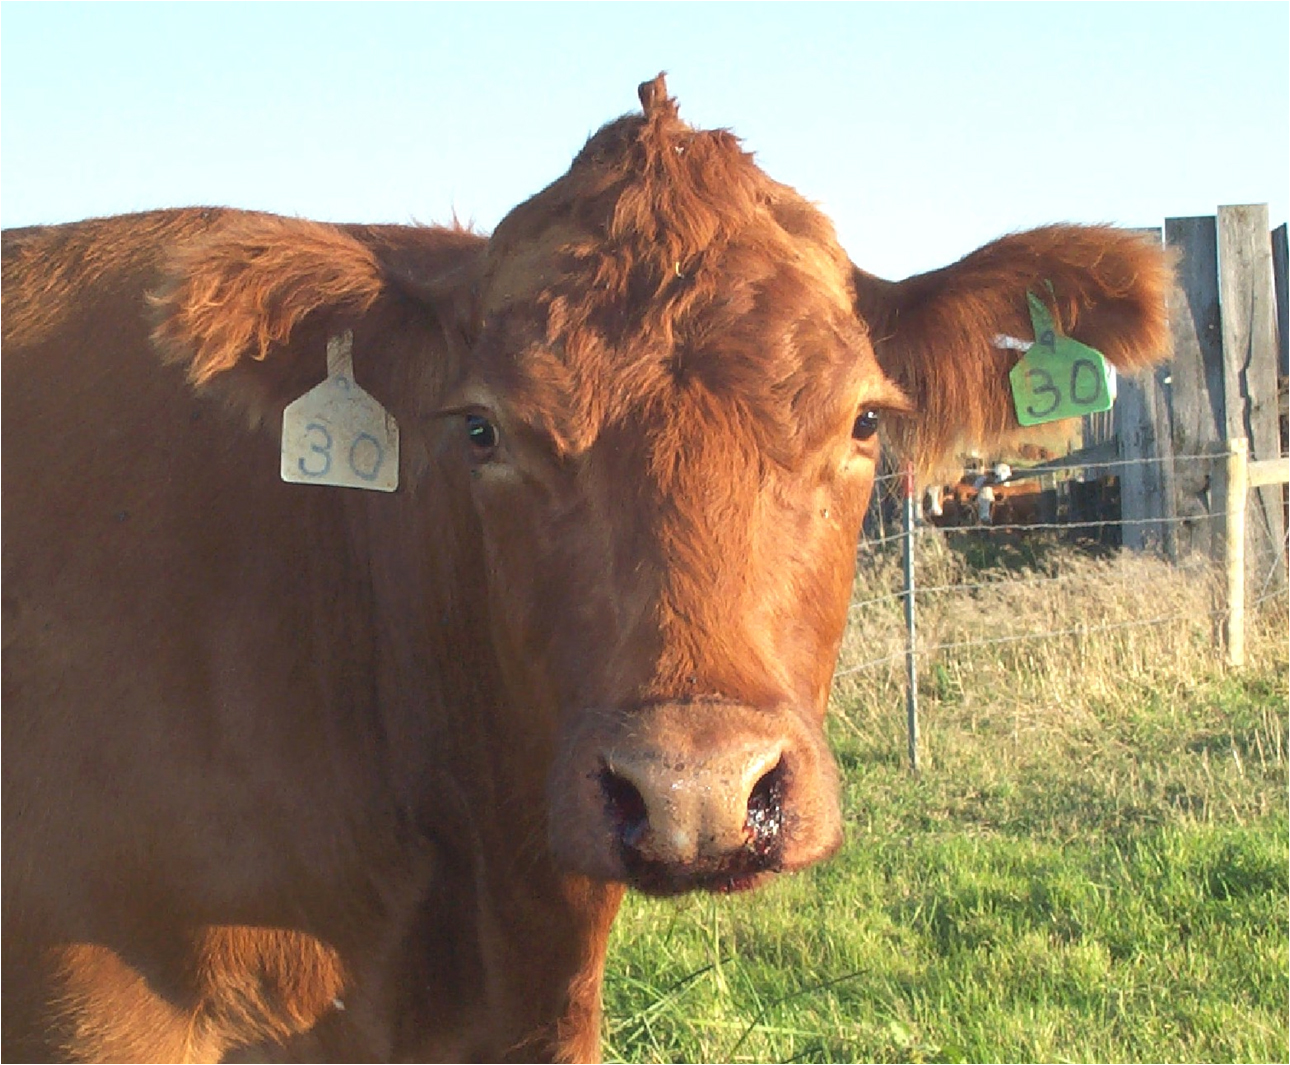 This cow was infected with anthrax. (Photo courtesy of the North Dakota Department of Agriculture)